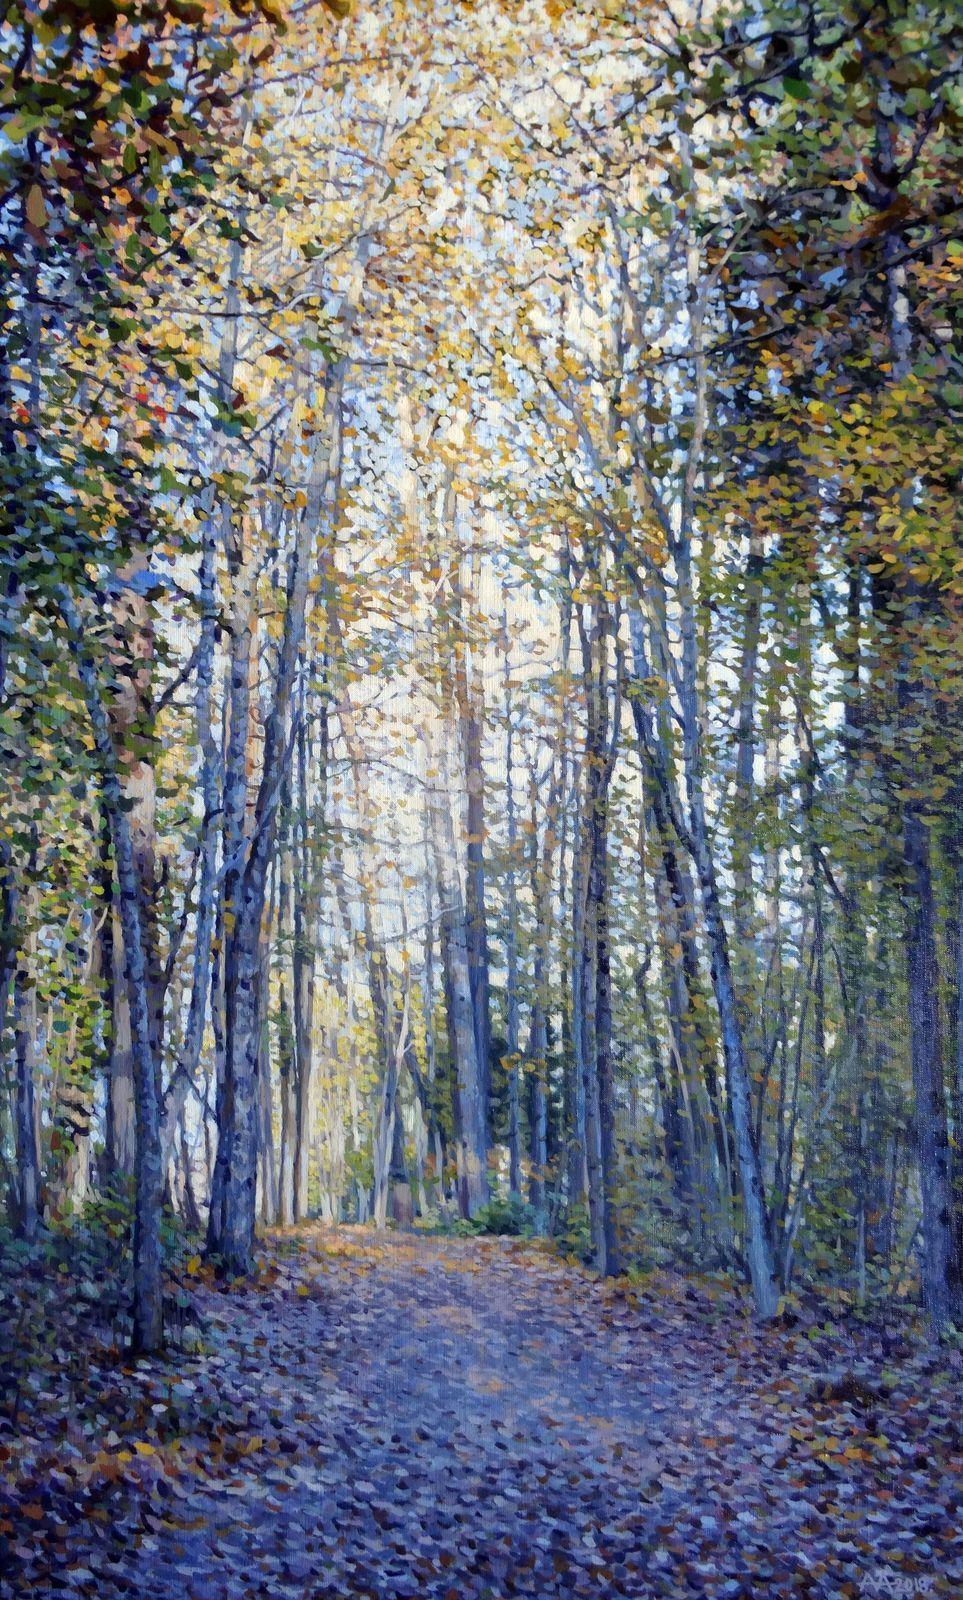 Andrey Amelkovich Landscape Painting - Autumn light. At sunny forest. 2018. Oil and acrylic on canvas, 119x72 cm